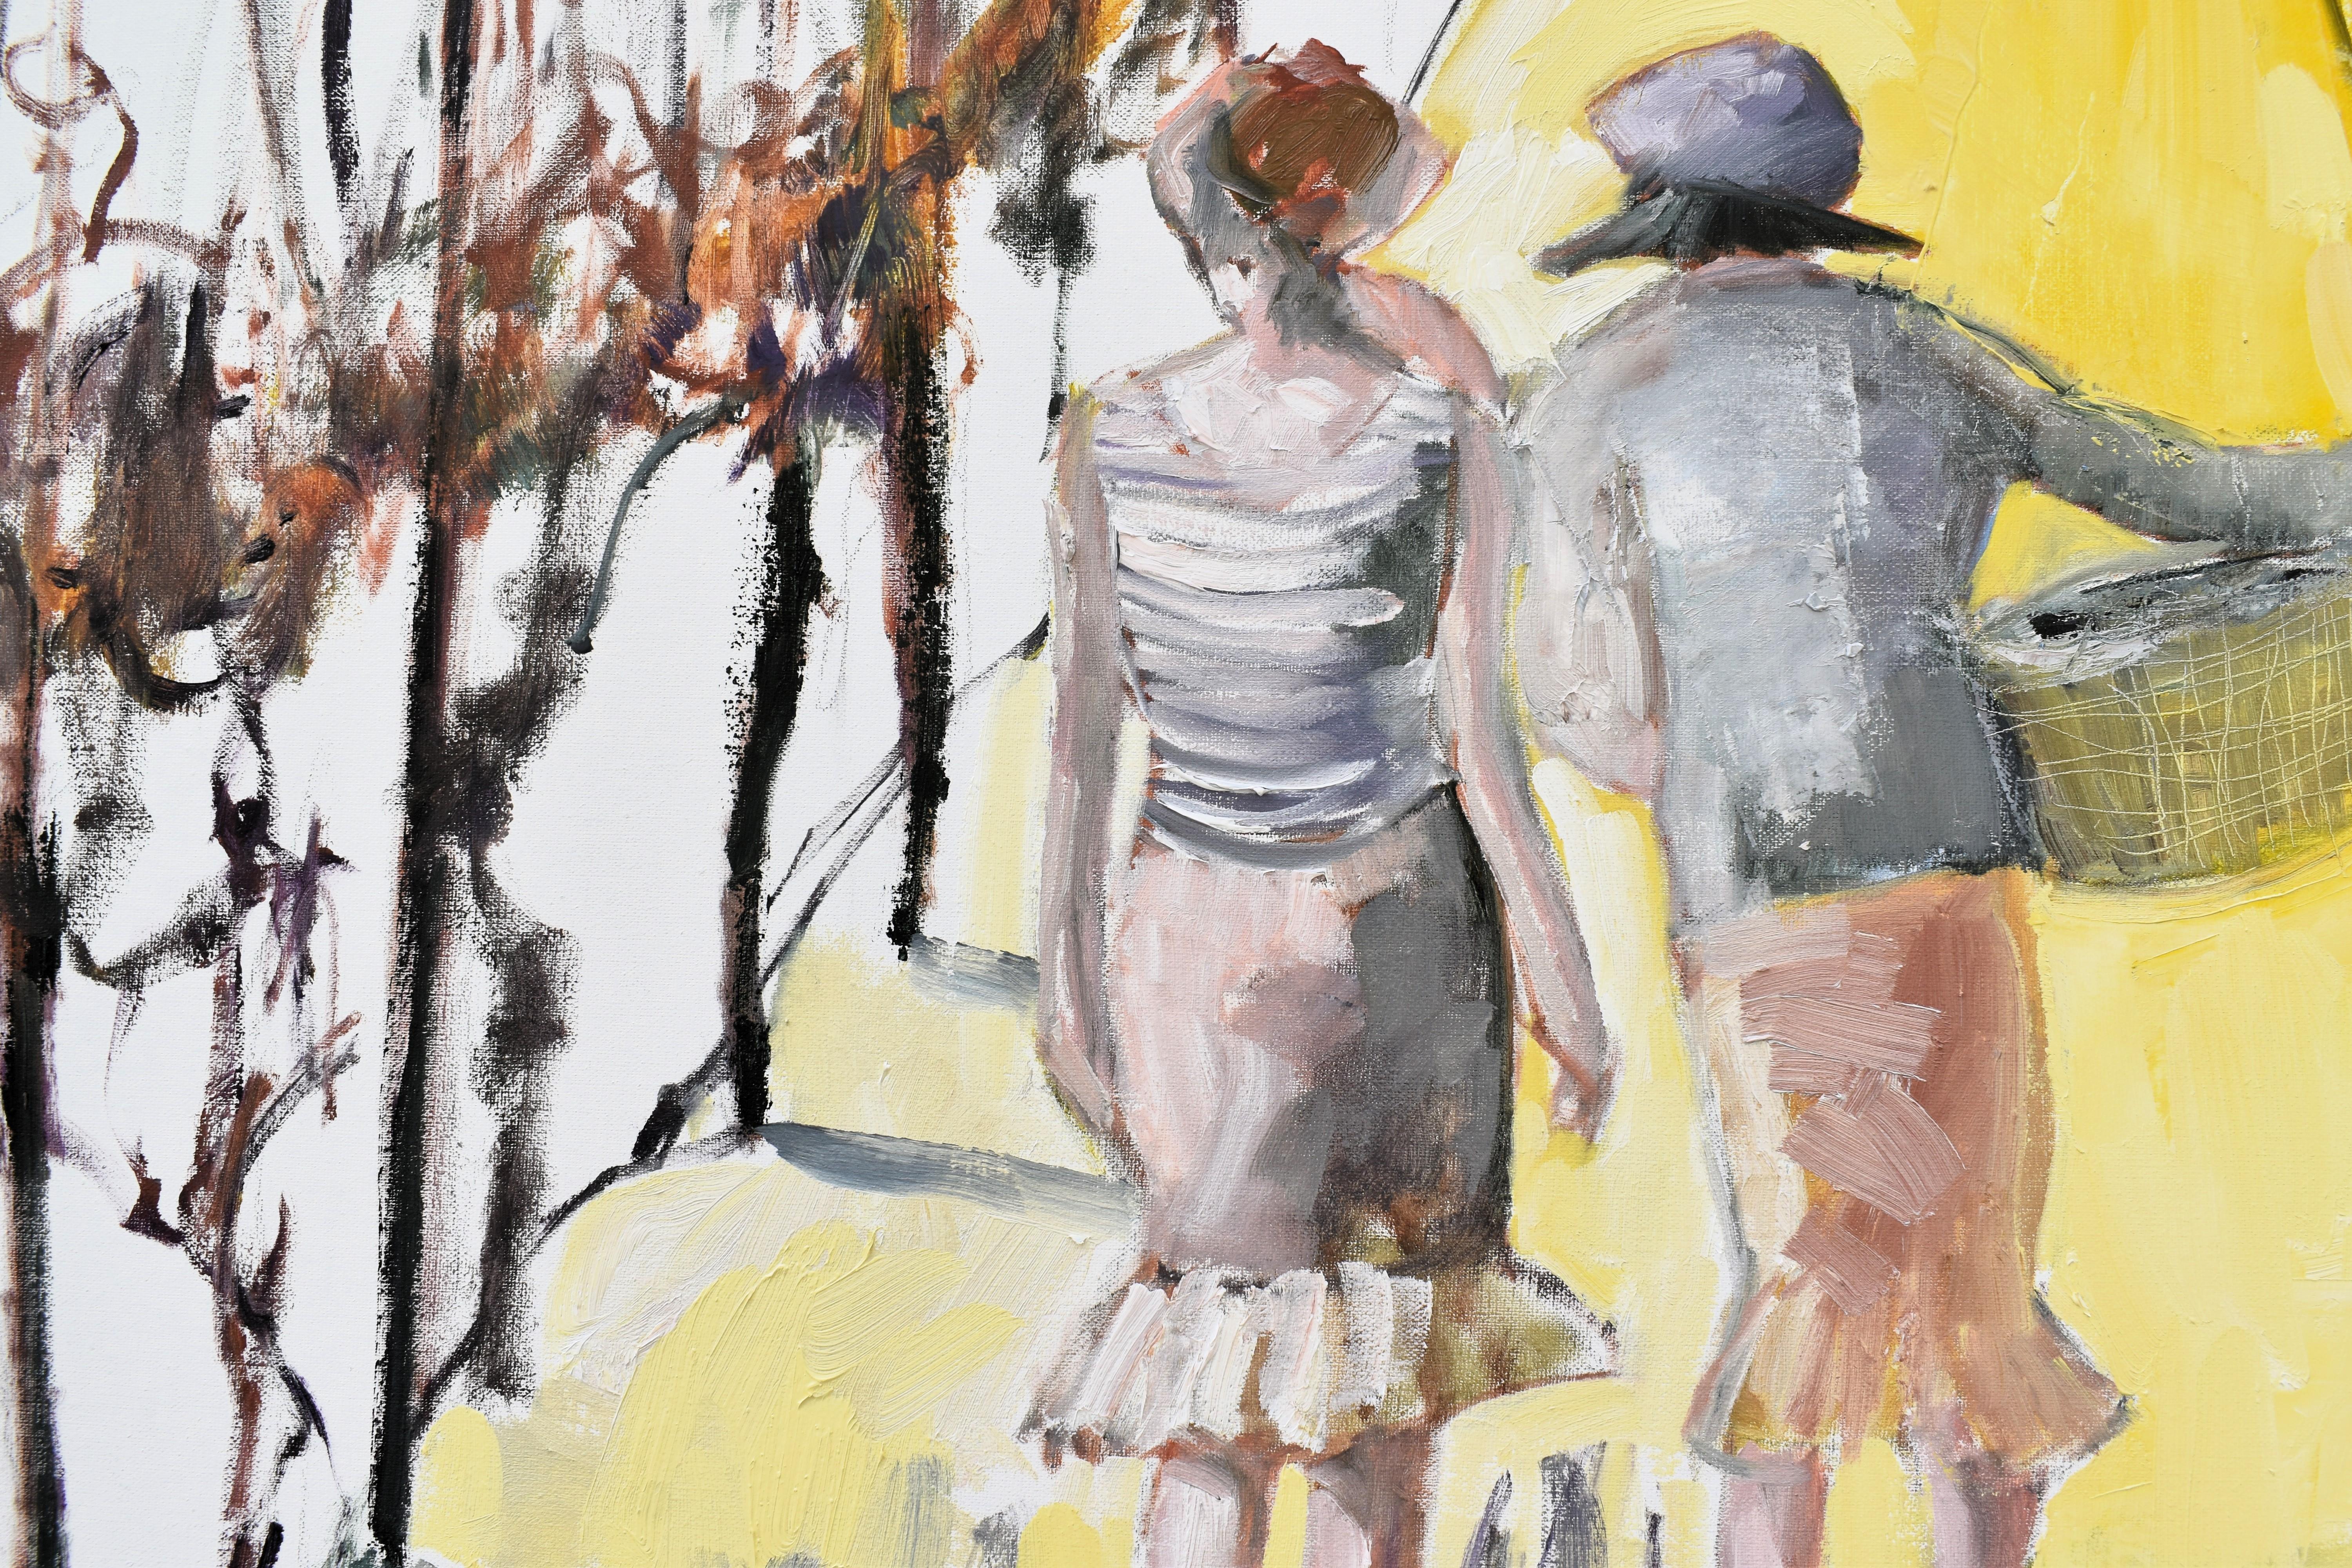 <p>Artist Comments<br>Two winemakers trek the vineyard isles toward the brightness and possibilities. An intentional use of white space in the composition allows the dominant yellow elements to stand out. With loose details and a limited palette,